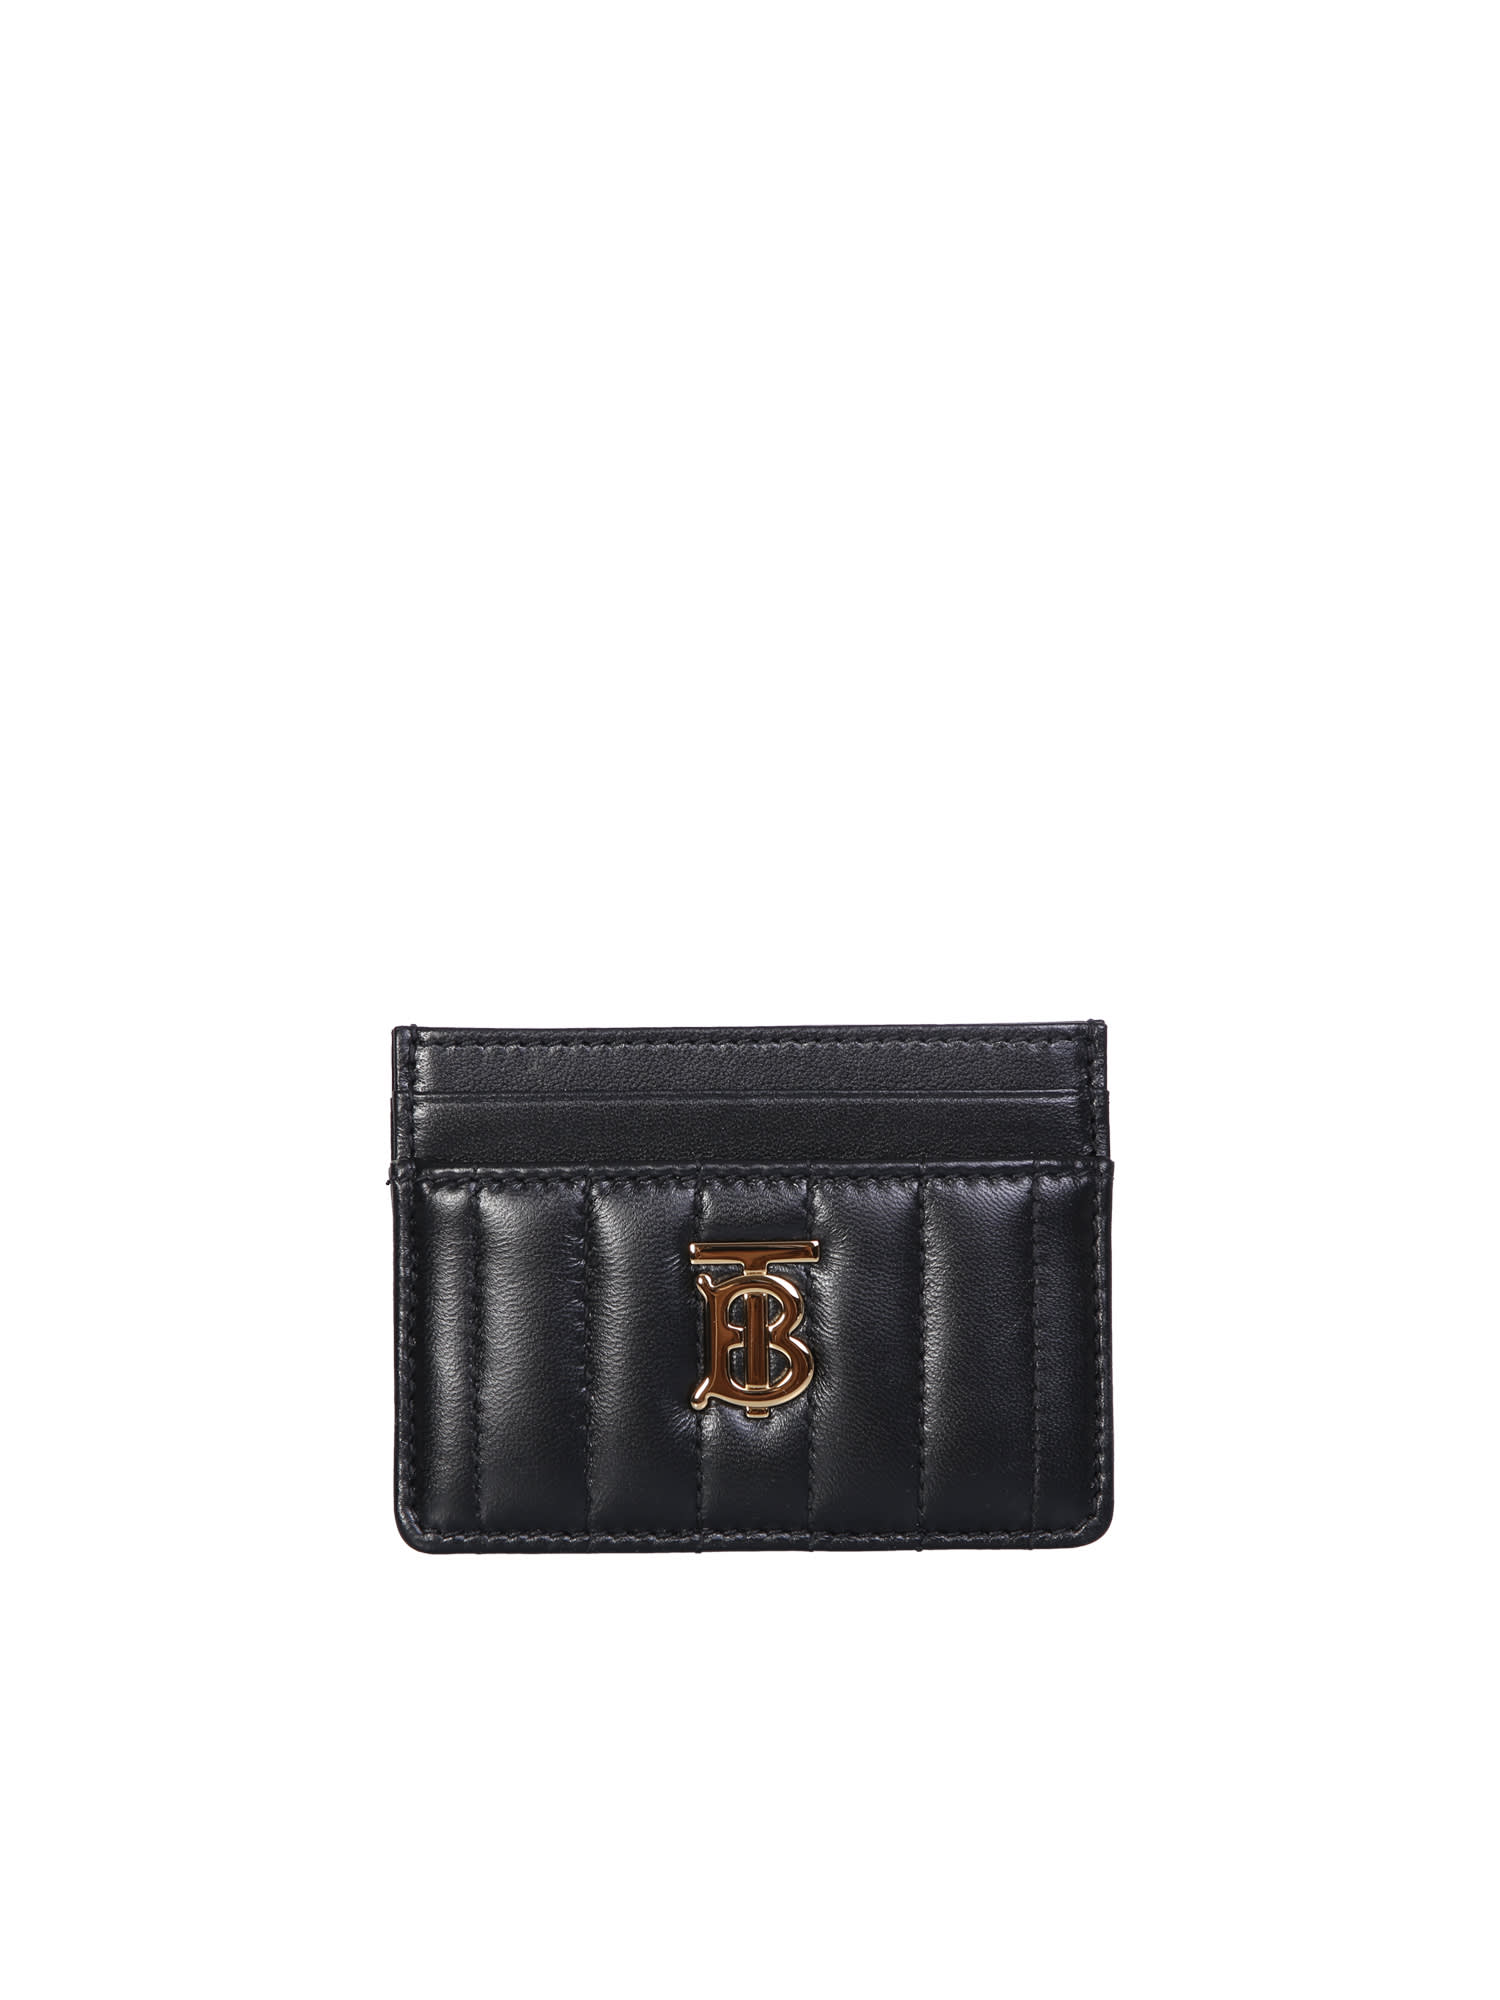 Burberry Quilted Lola Cardholder